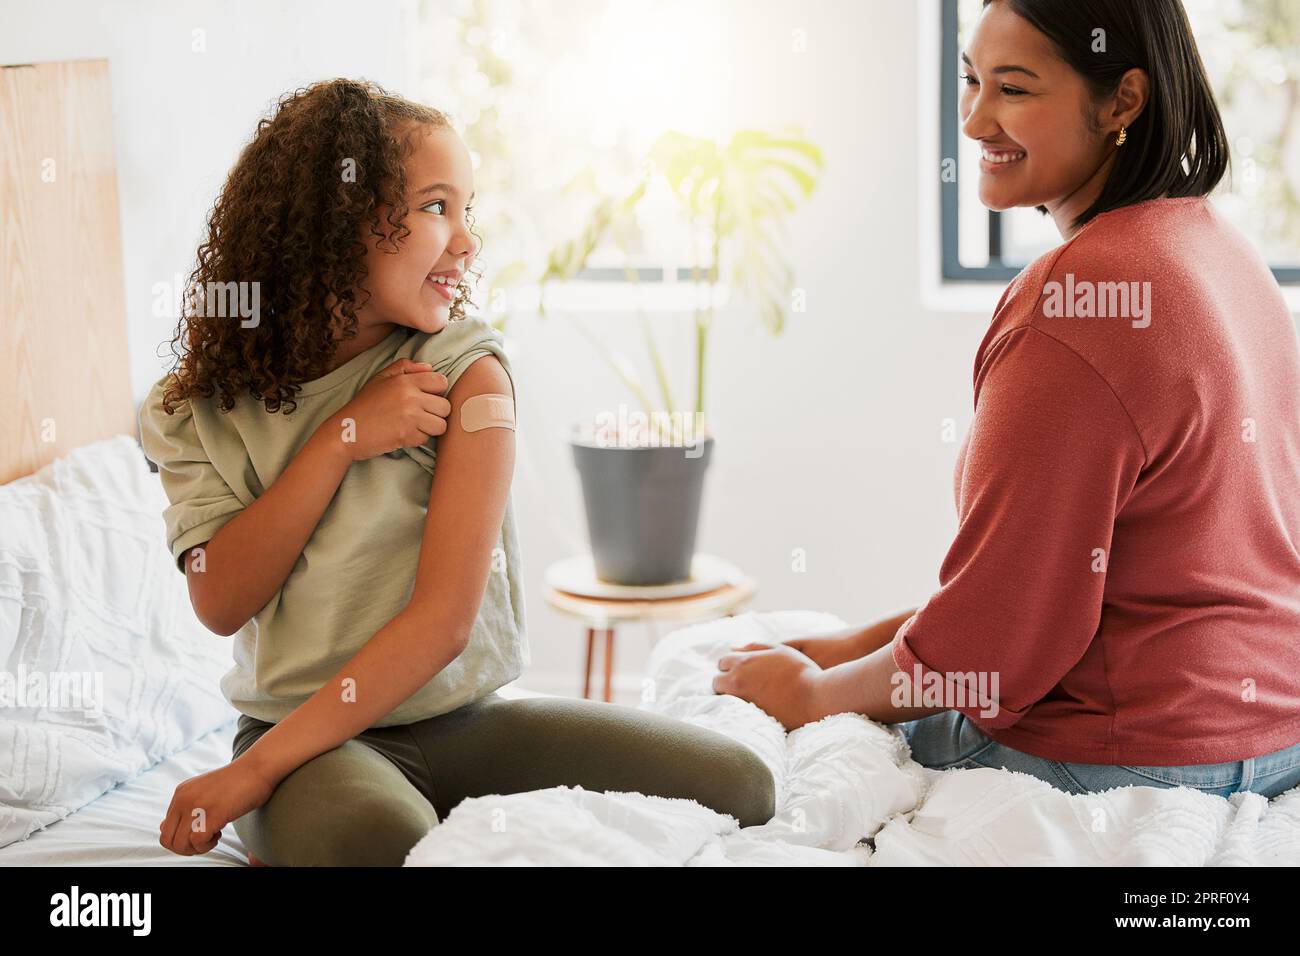 Girl with covid vaccine shows mother vaccinated arm with plaster as covid19 protection for a kid in a bedroom home. Child after getting an injection bonding with her mom in the bedroom Stock Photo